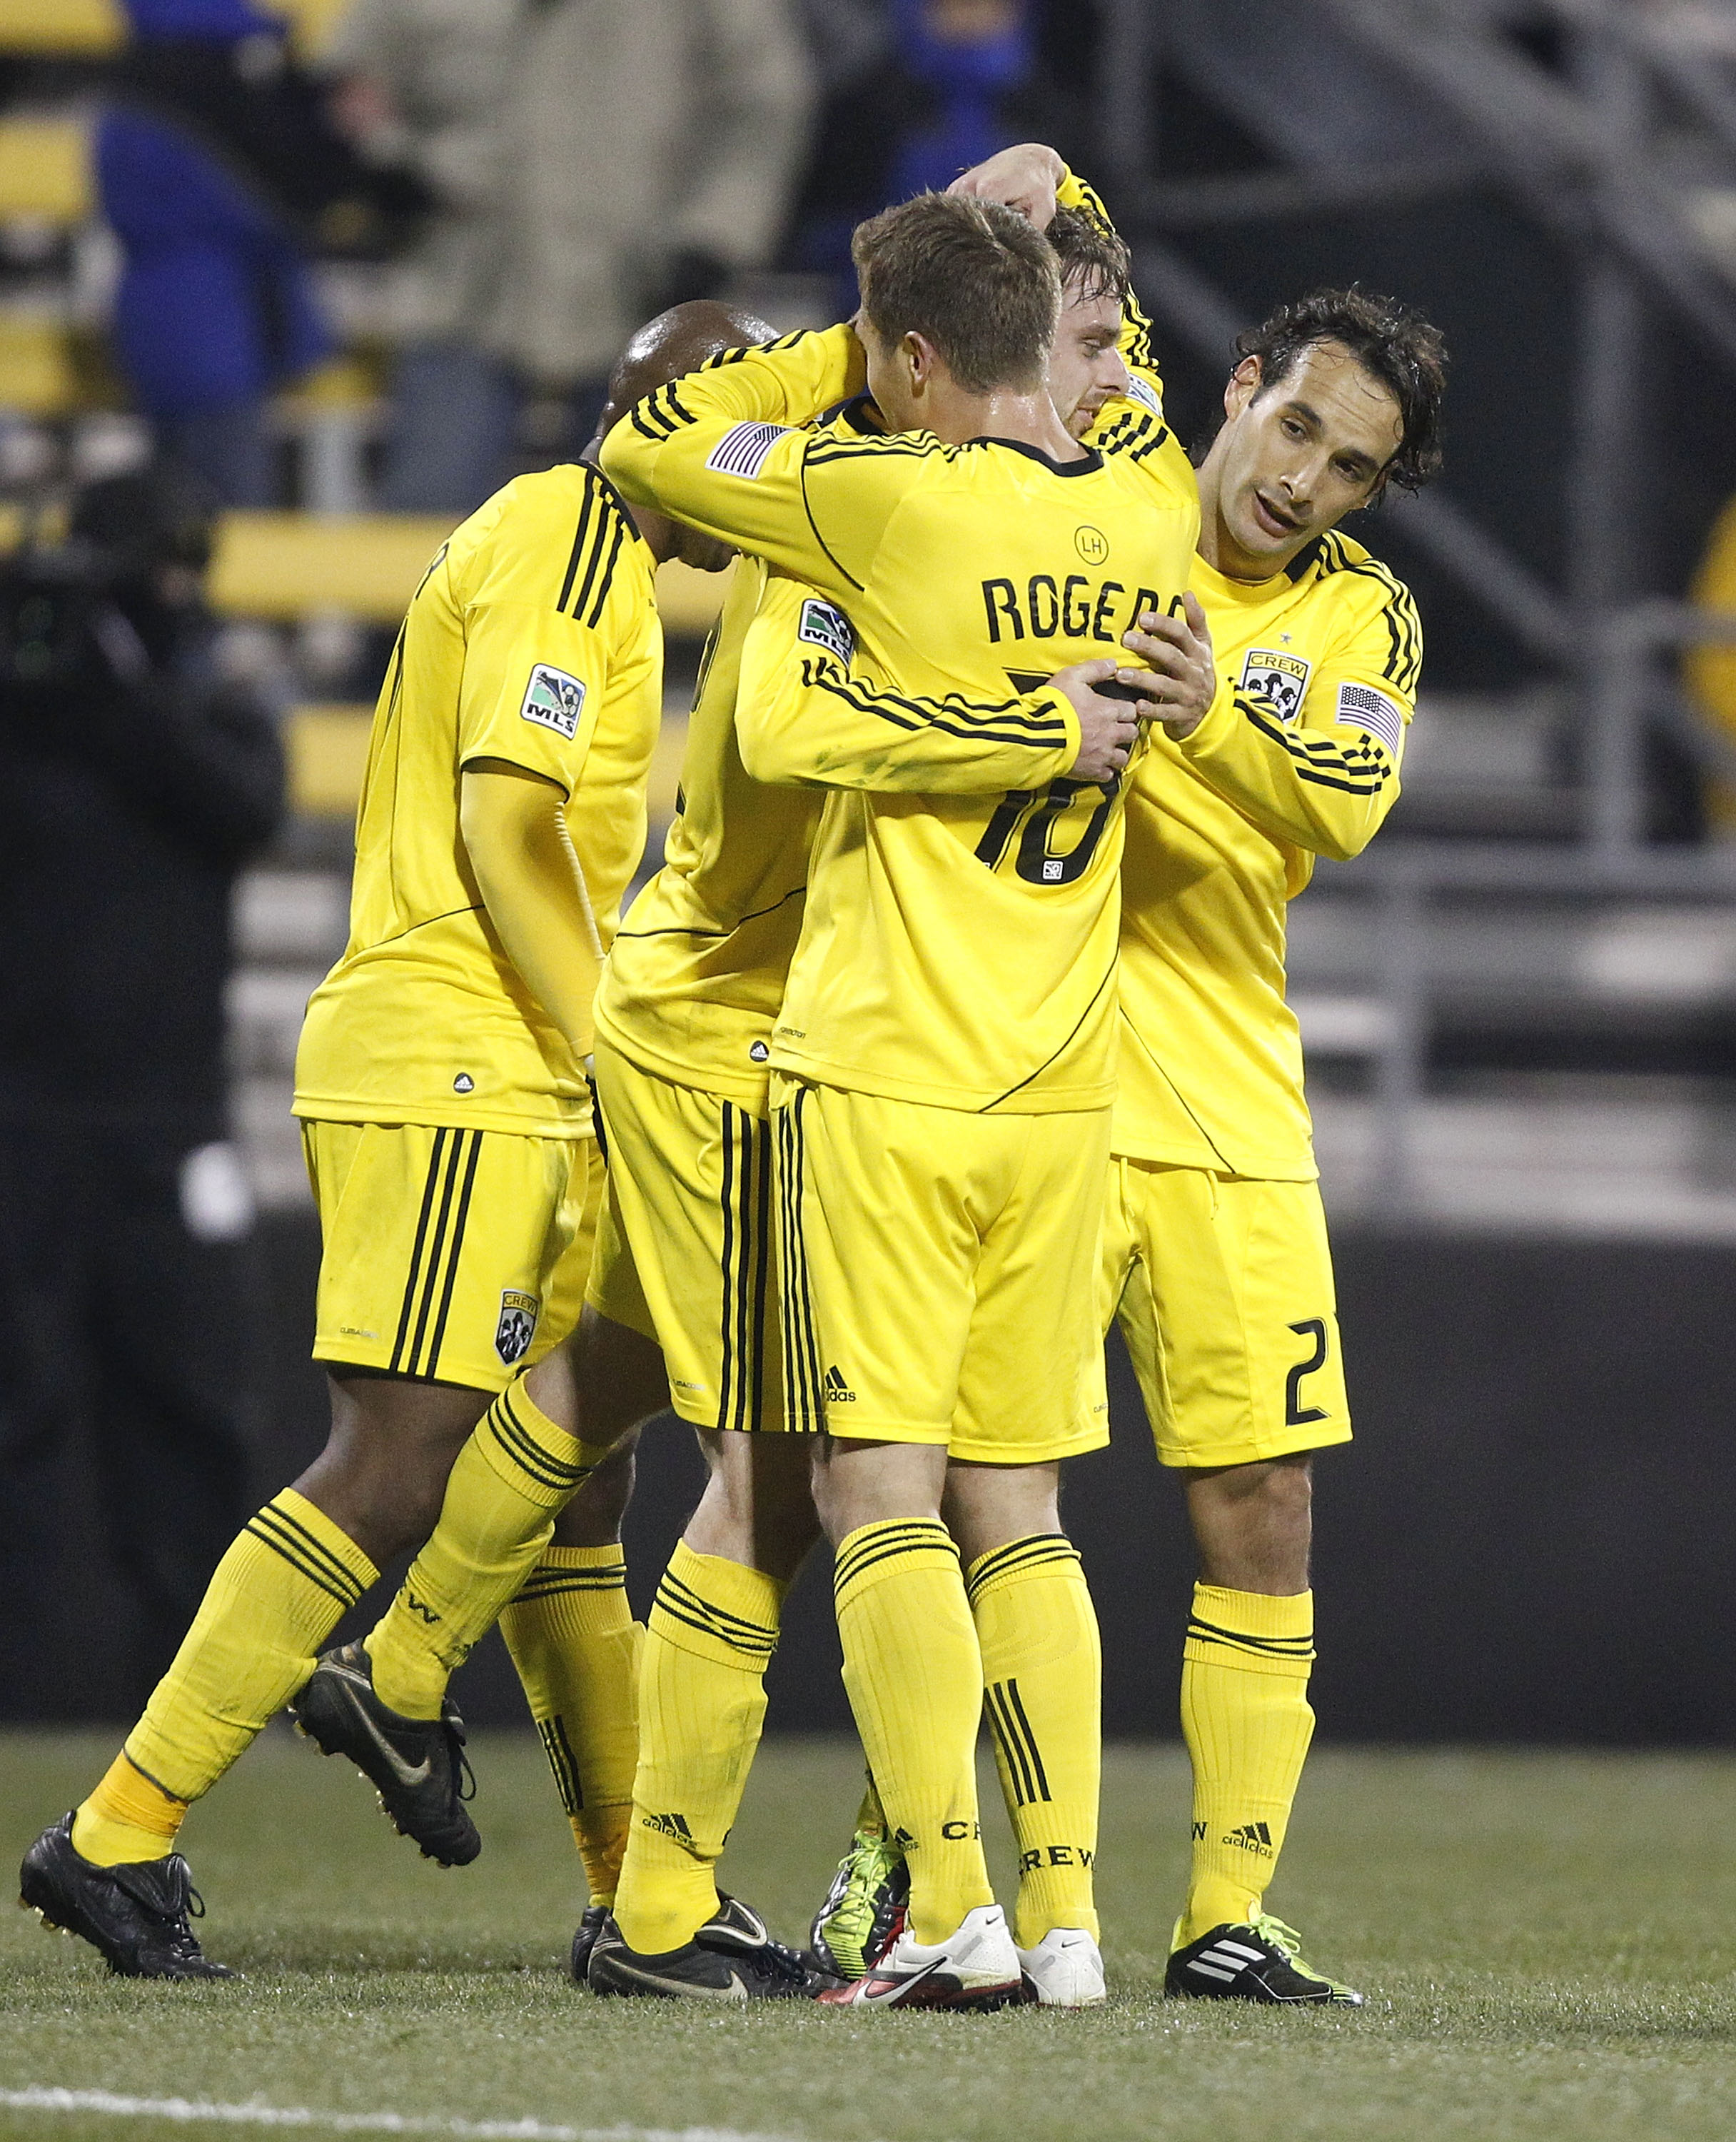 COLUMBUS, OH - APRIL 01:  Eddie Gaven #12 of the Columbus Crew celebrates with Robbie Rogers #18 and Rich Balchan #2 after scoring a goal against FC Dallas at Crew Stadium on April 1, 2011 in Columbus, Ohio.  (Photo by Matt Sullivan/Getty Images)